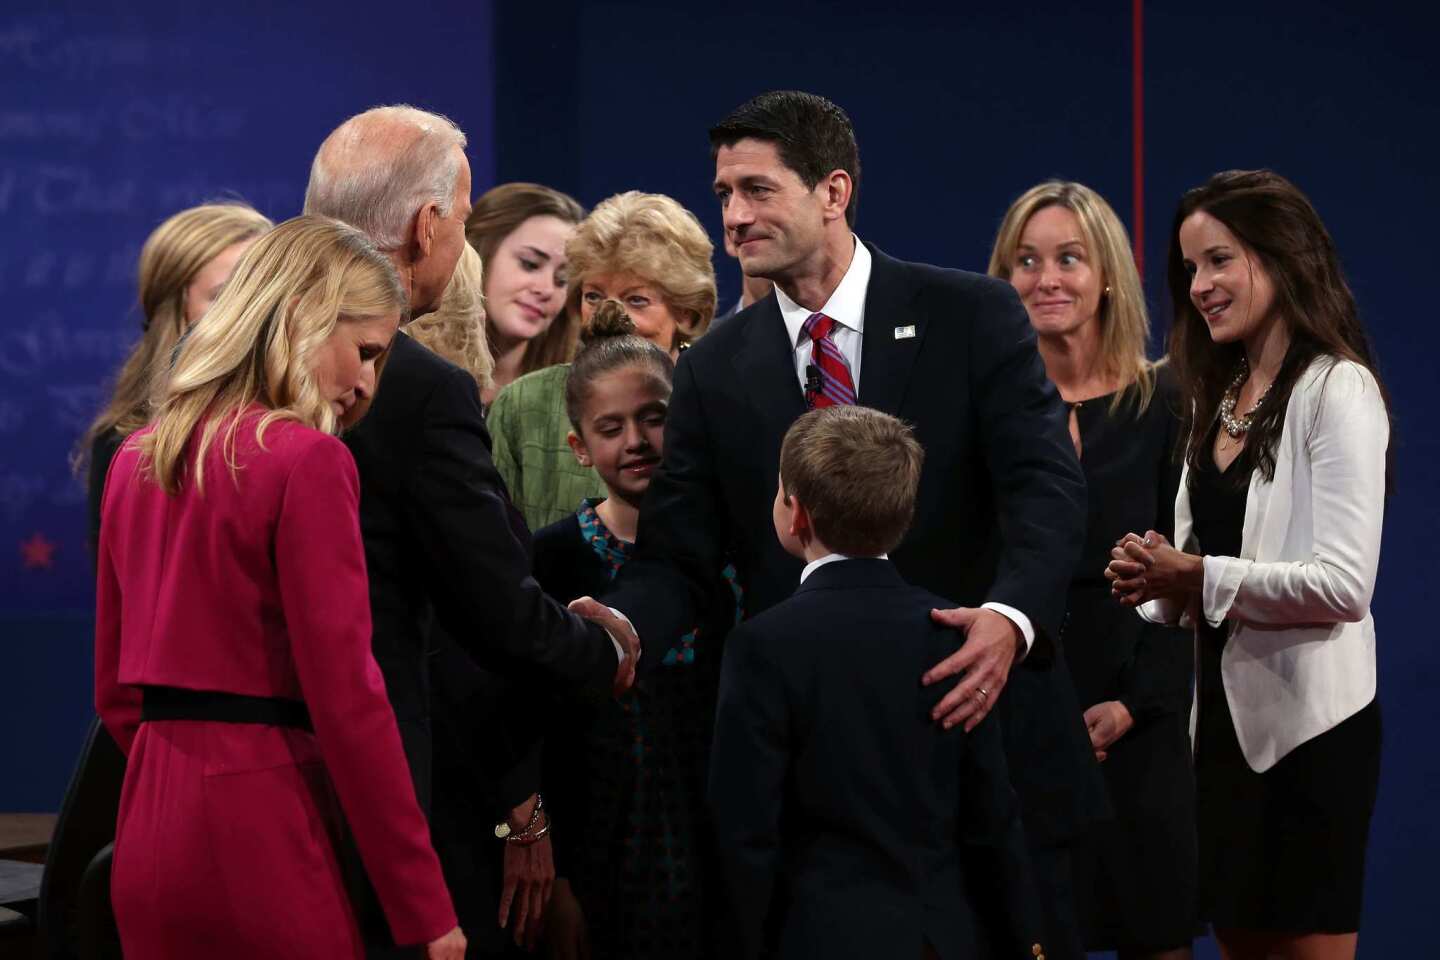 The Biden and Ryan families join the debaters onstage after the vice presidential showdown.